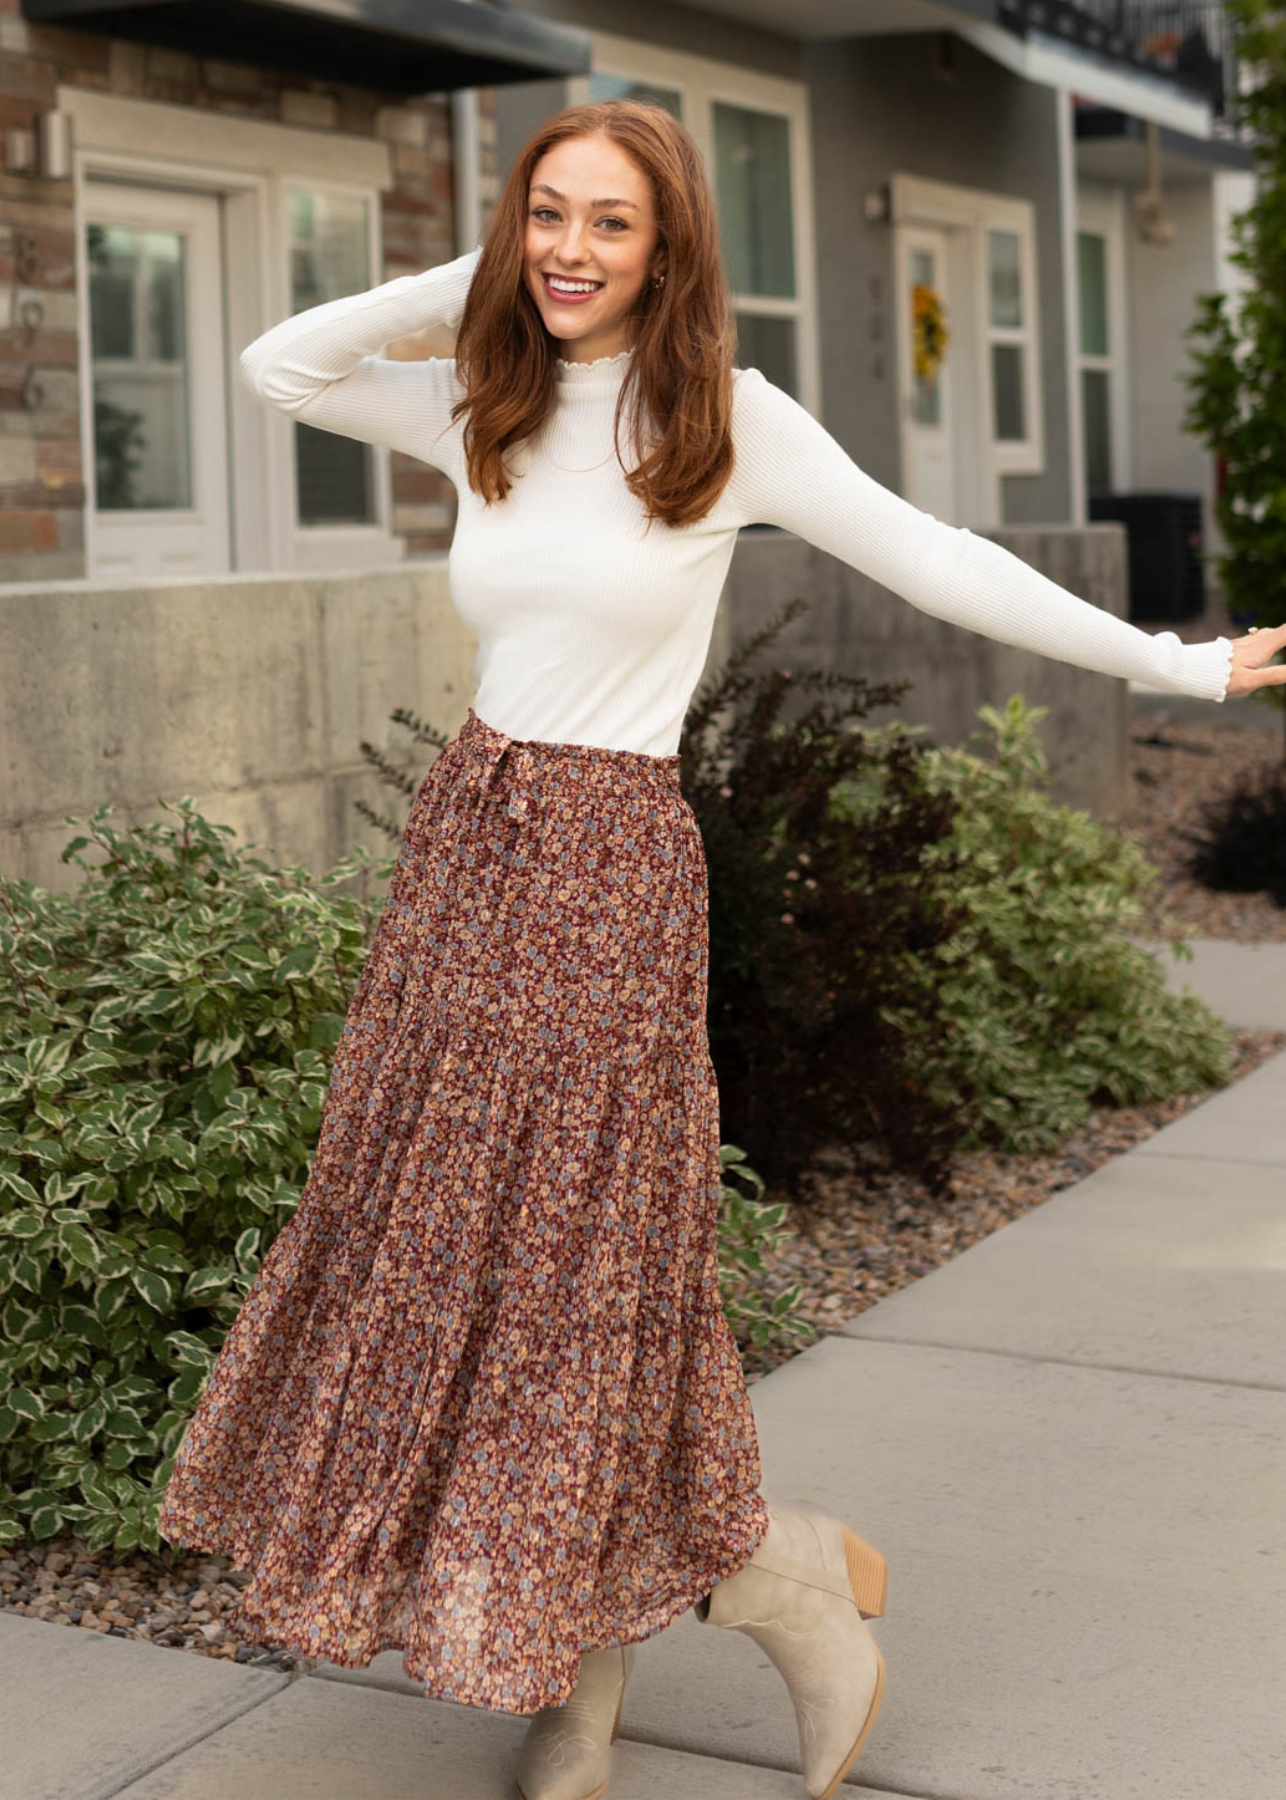 Burgundy floral skirt with a tie at the waist